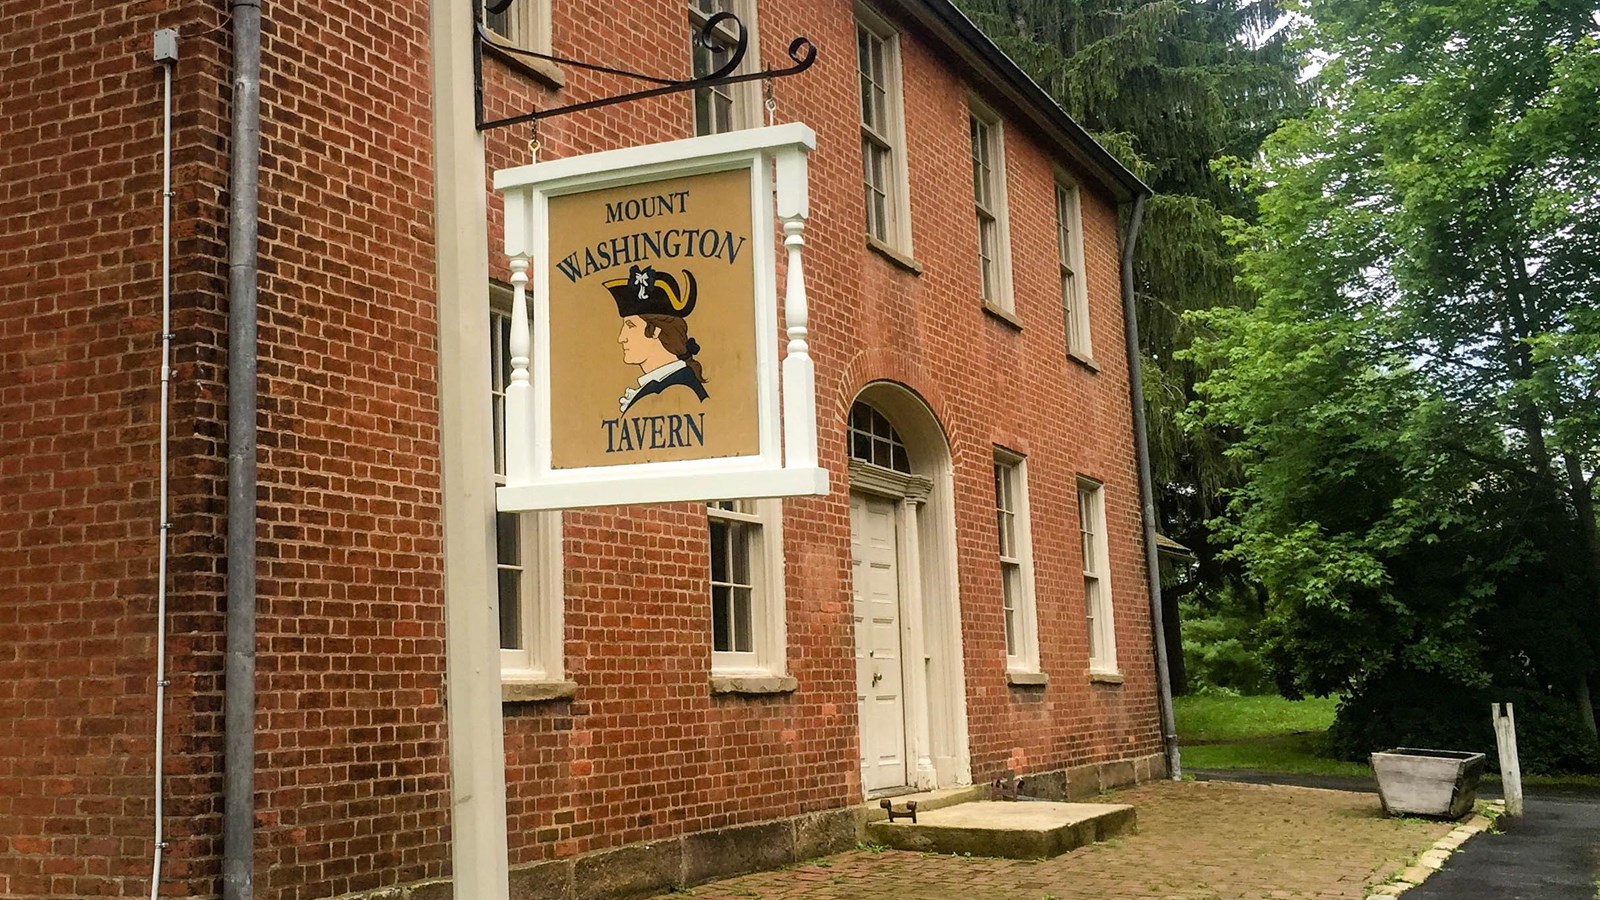 Two story brick building with a sign in fornt